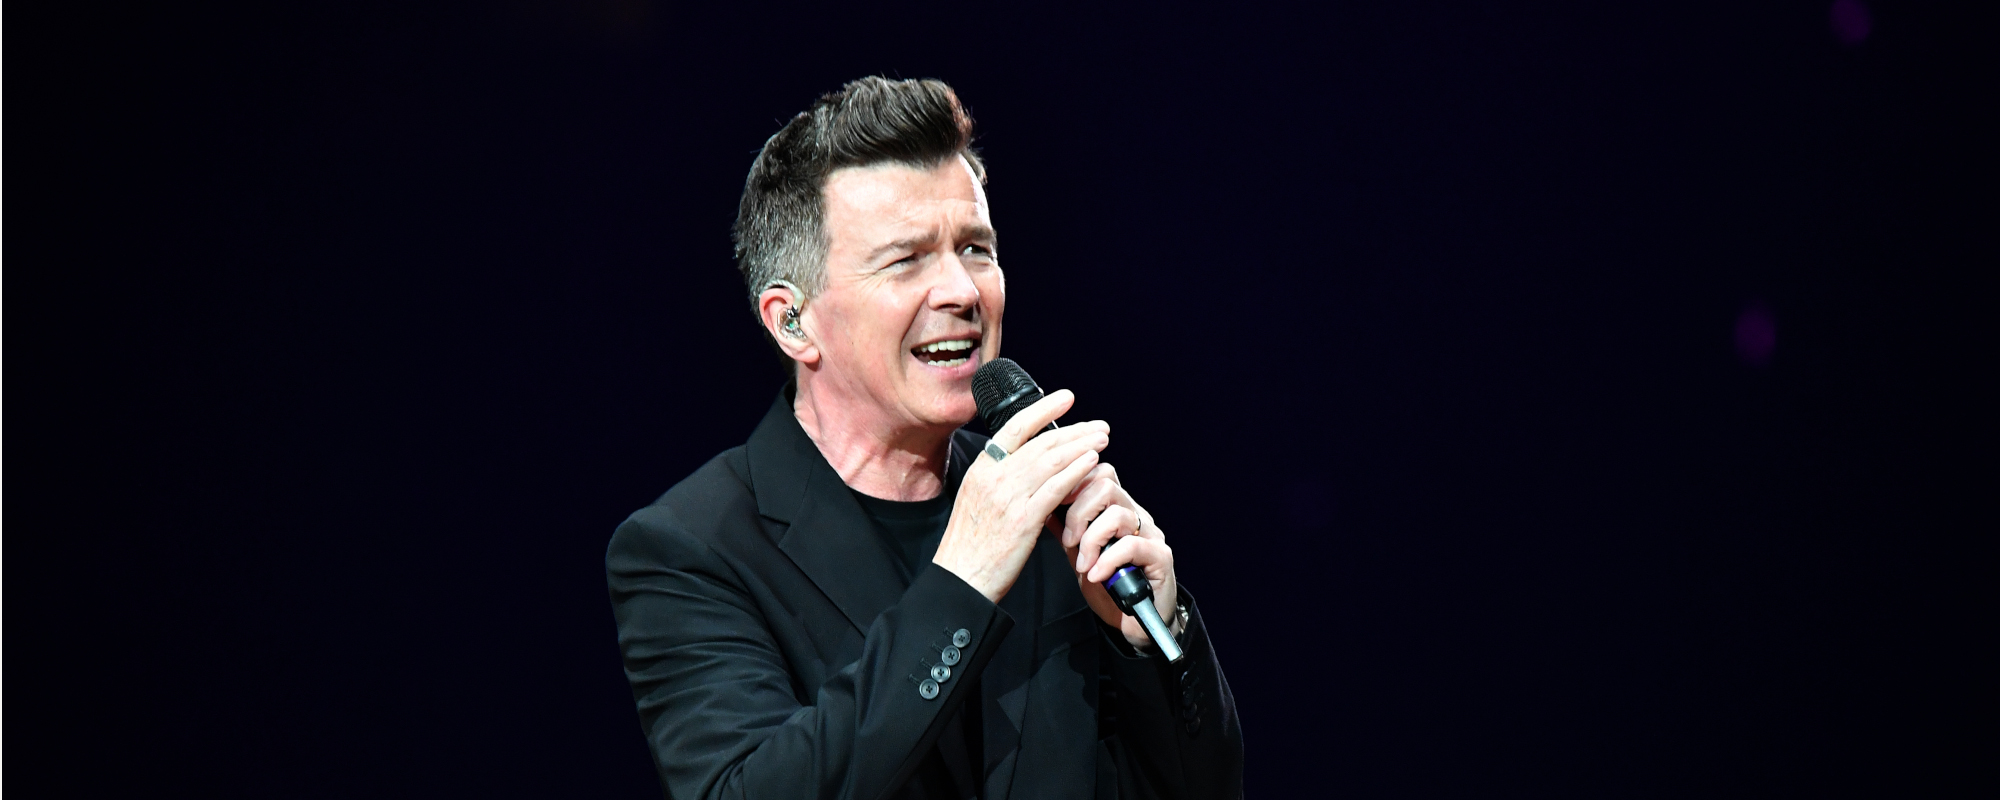 Rick Astley Reveals Upcoming Album ‘Are We There Yet?’